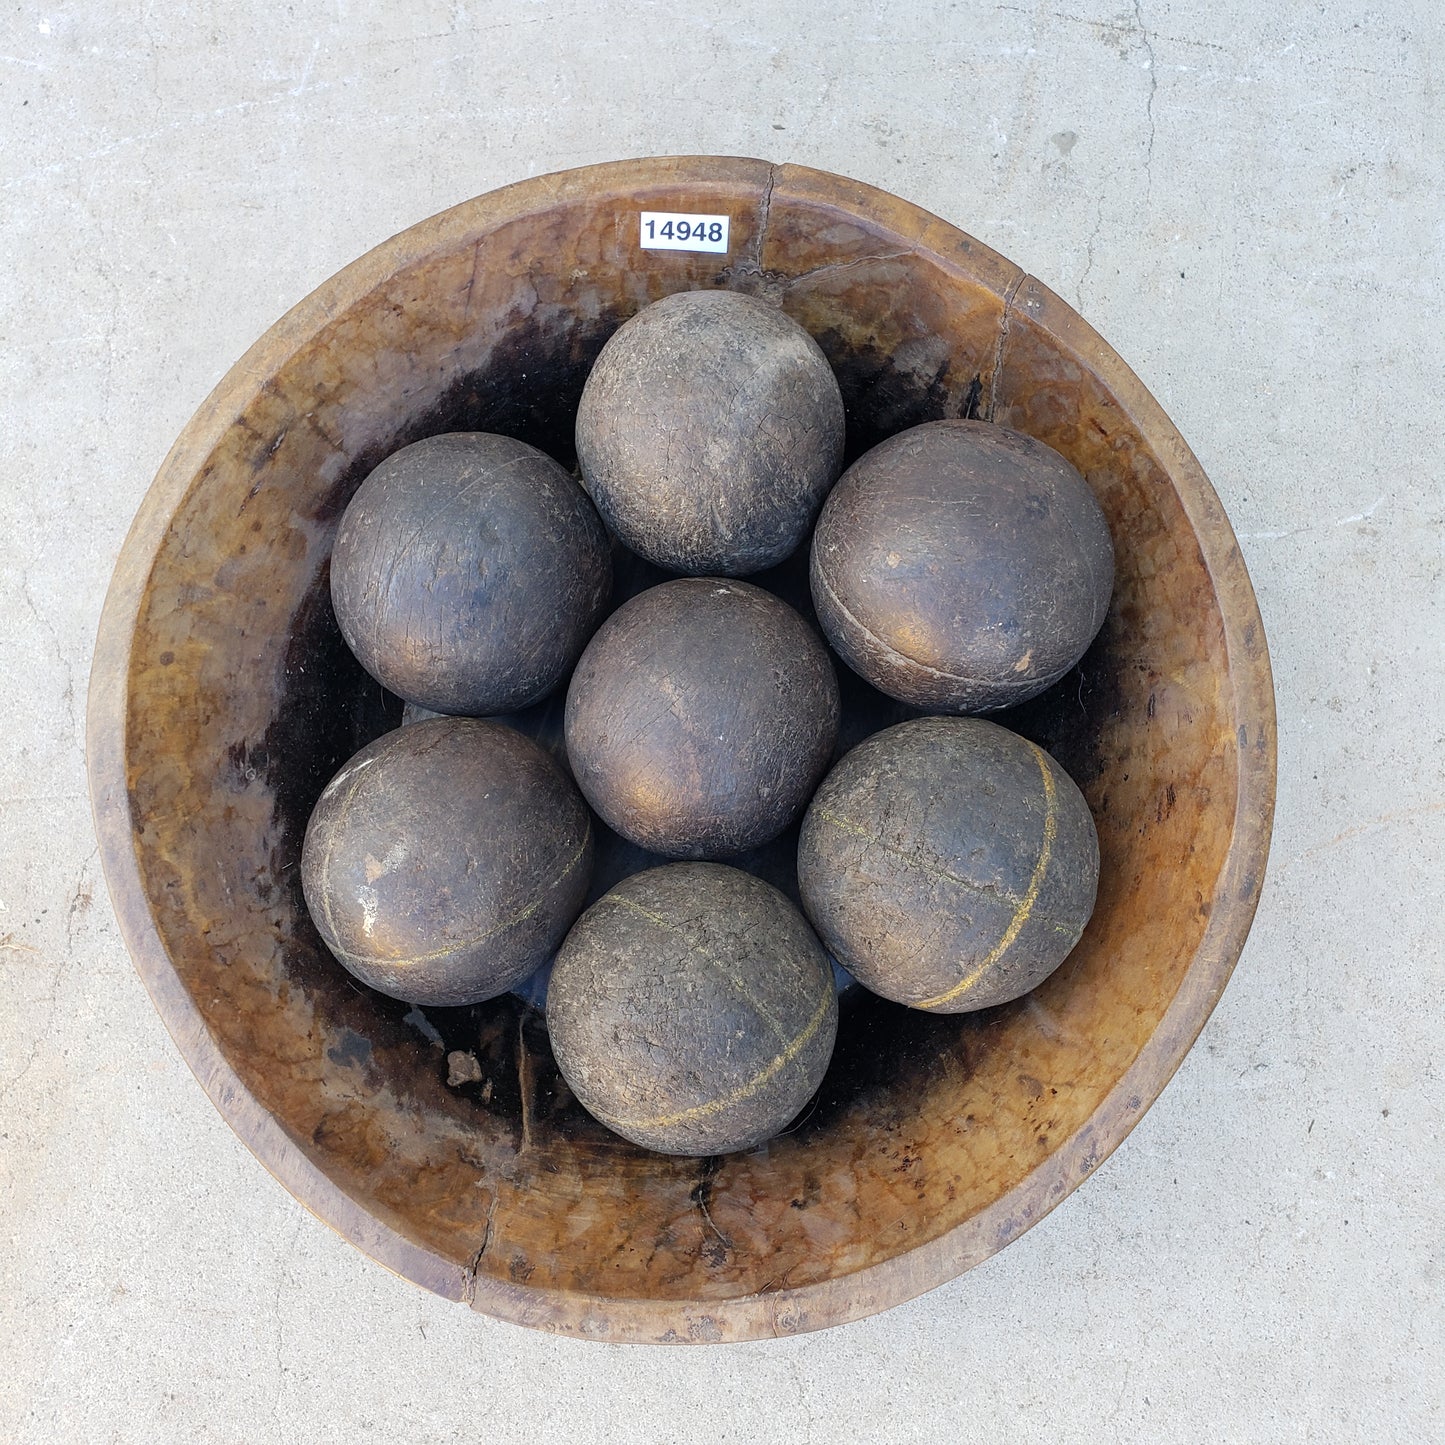 Wooden Bowl with Seven Wooden Balls